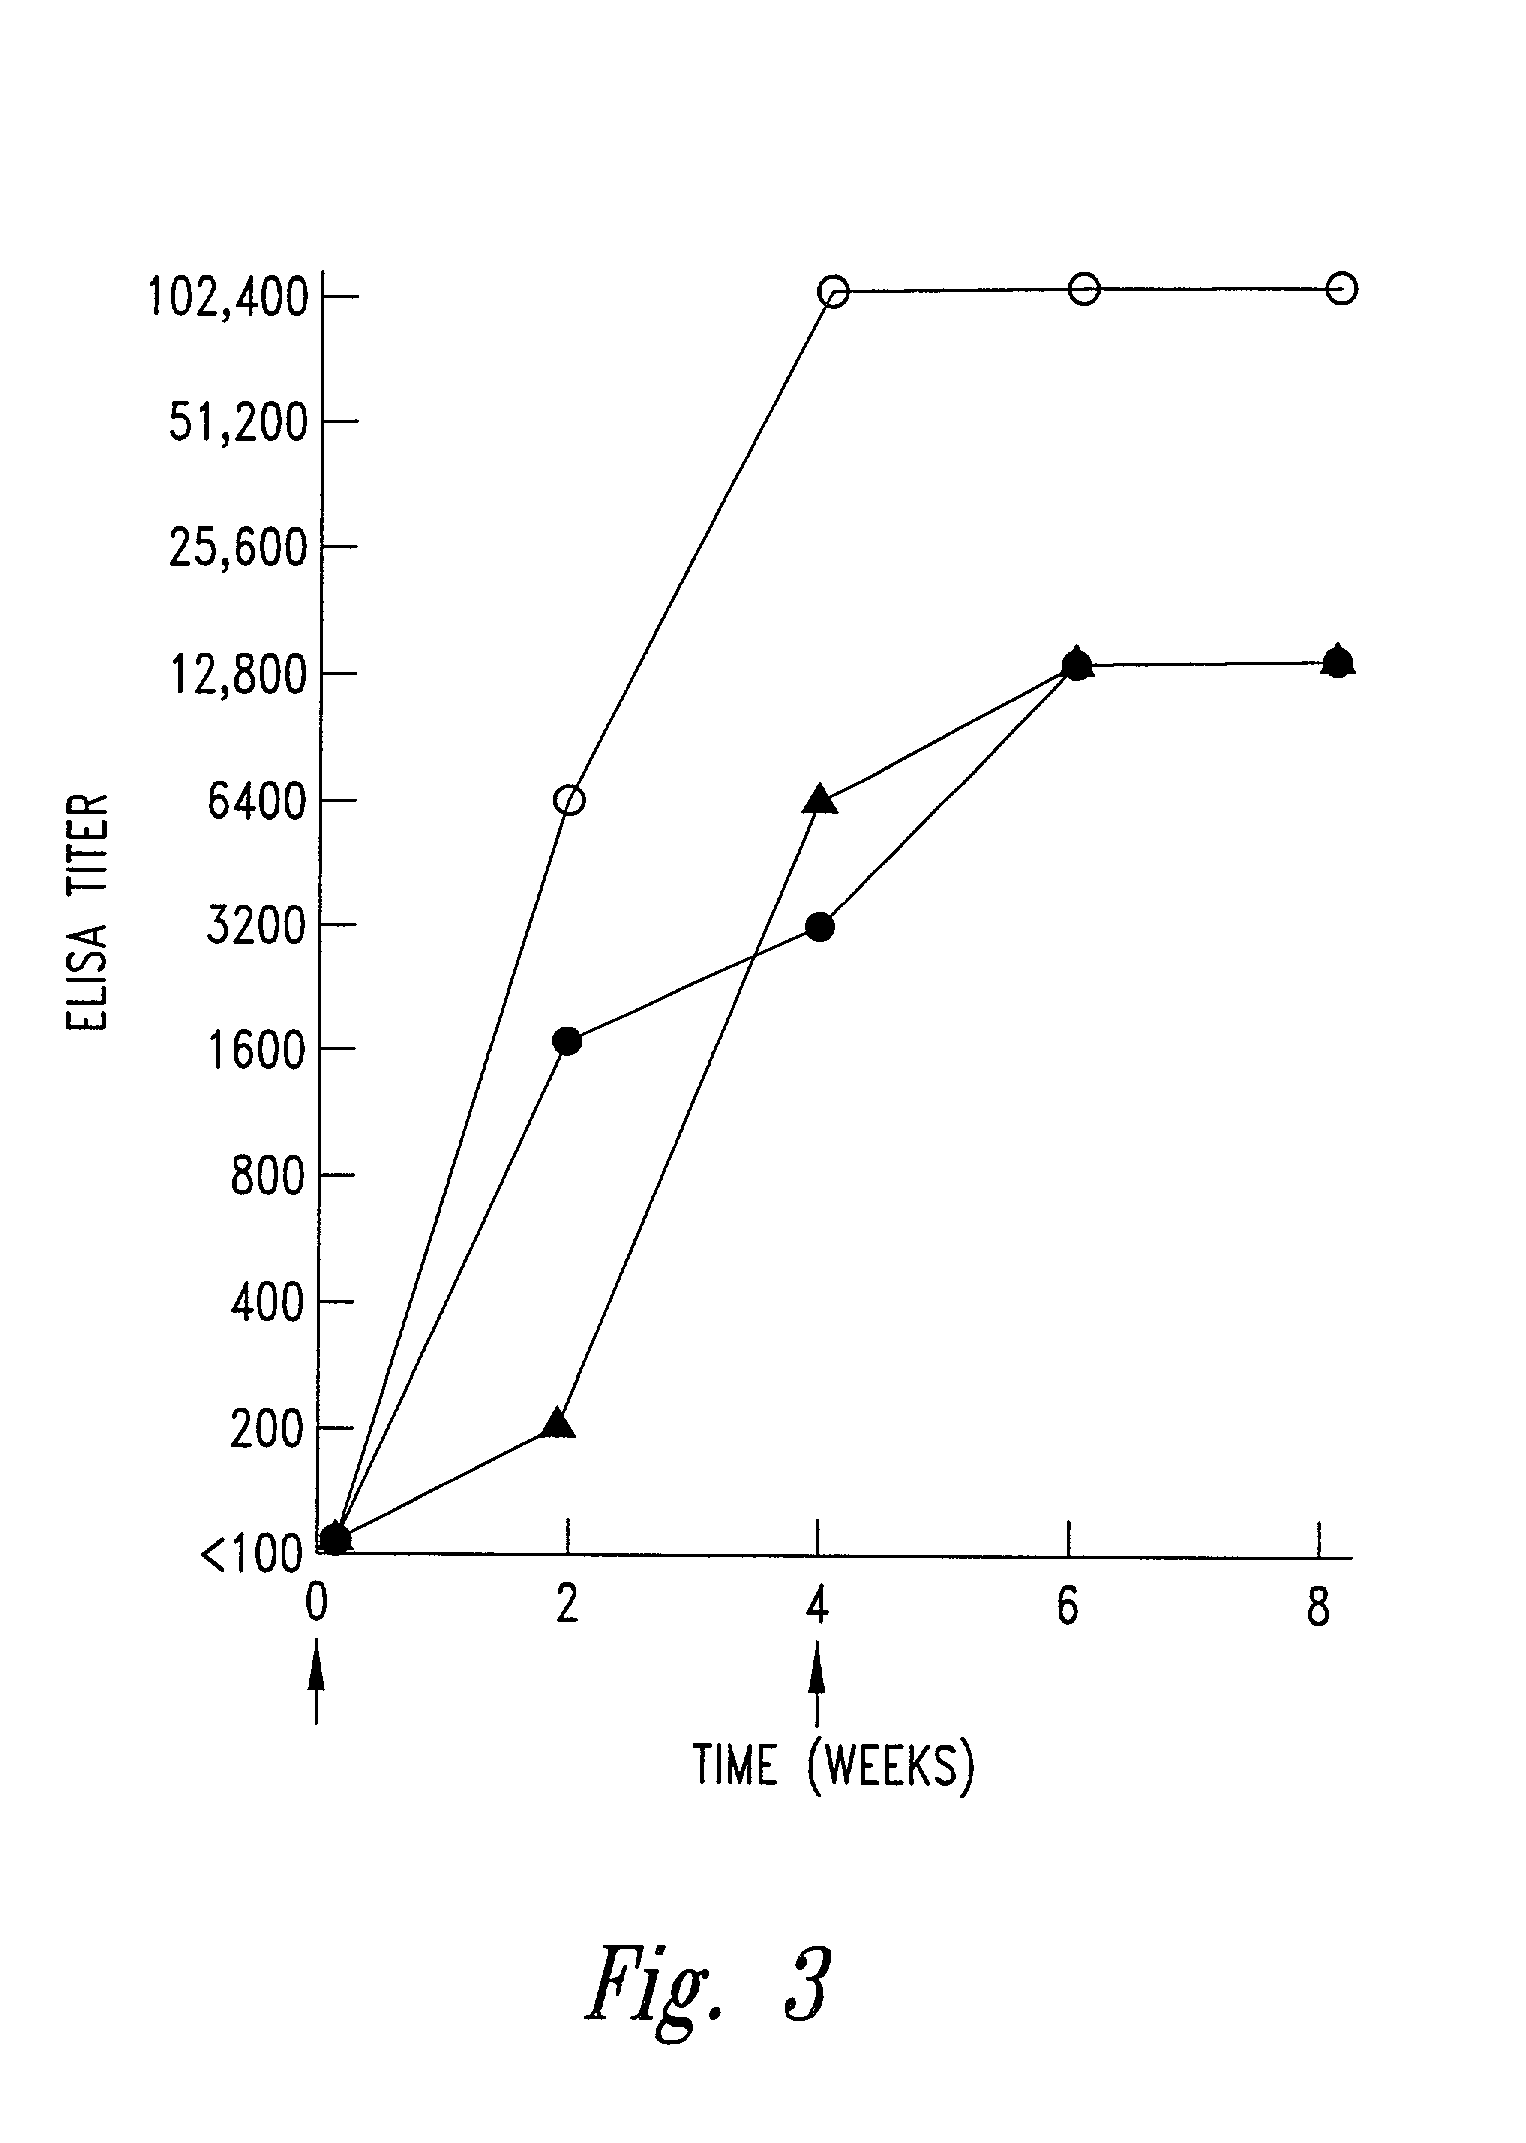 Antigen of hybrid M protein and carrier for group A streptococcal vaccine